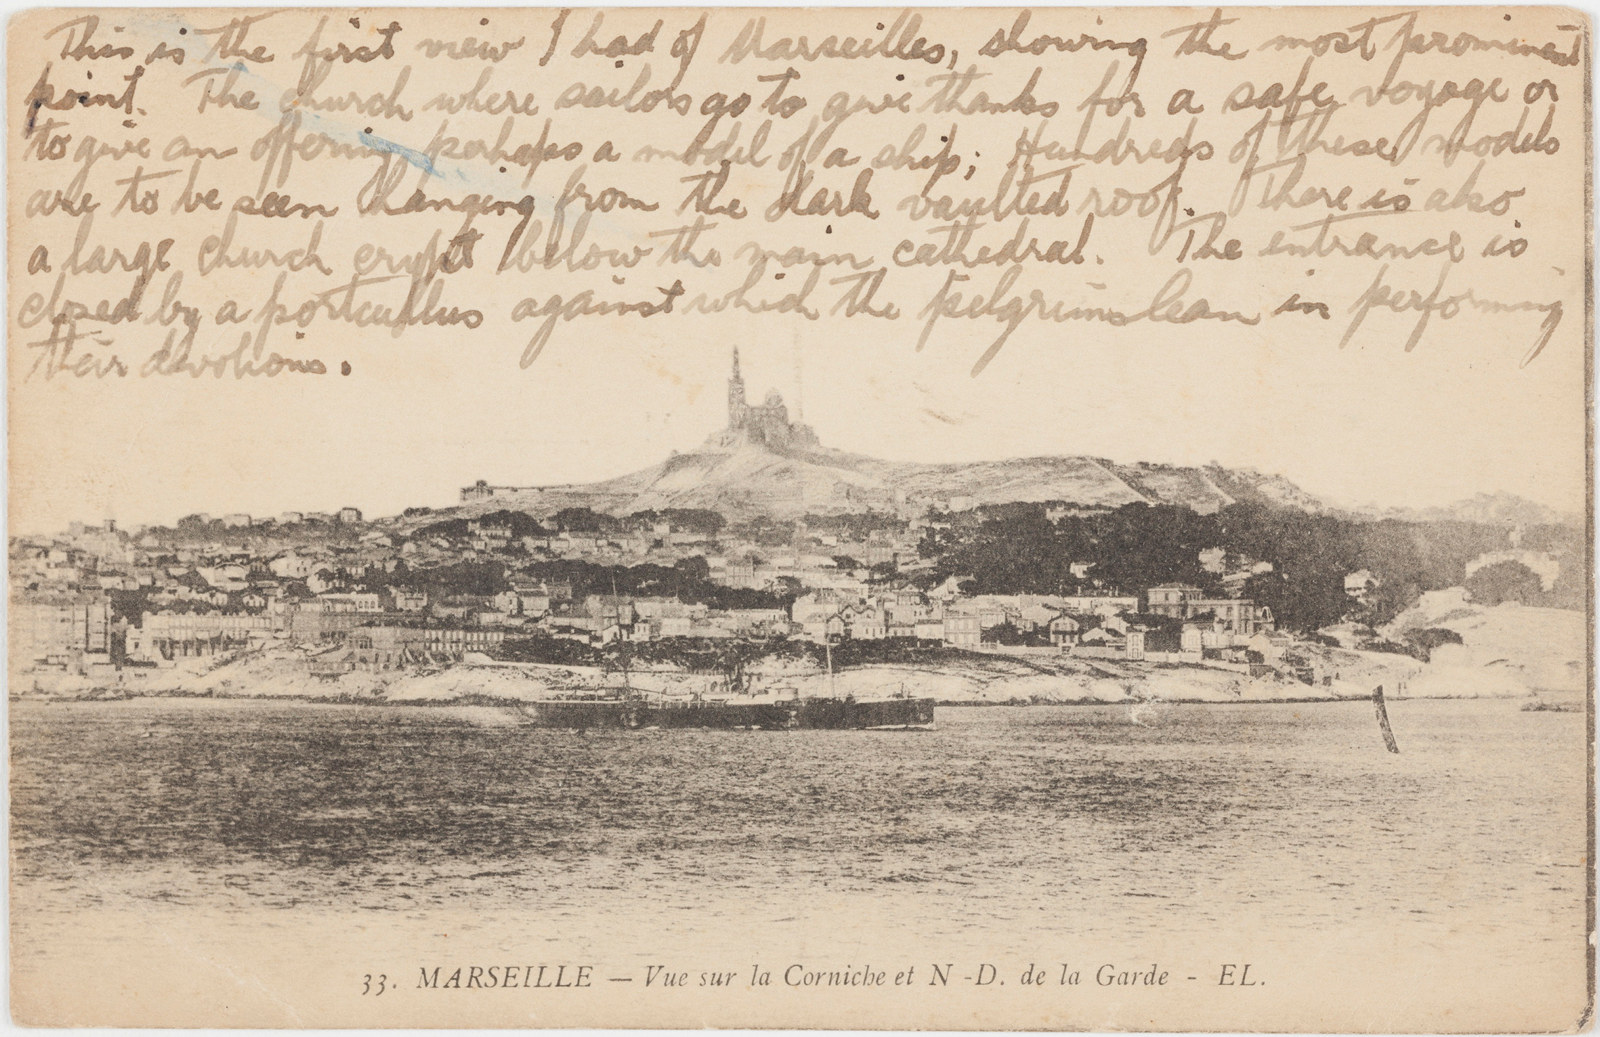 Postcard of Marseilles sent by Robert Barnet from Etaples in France to his grandfather Roderick McGregor  in Nowra, New South Wales, 4 June 1916